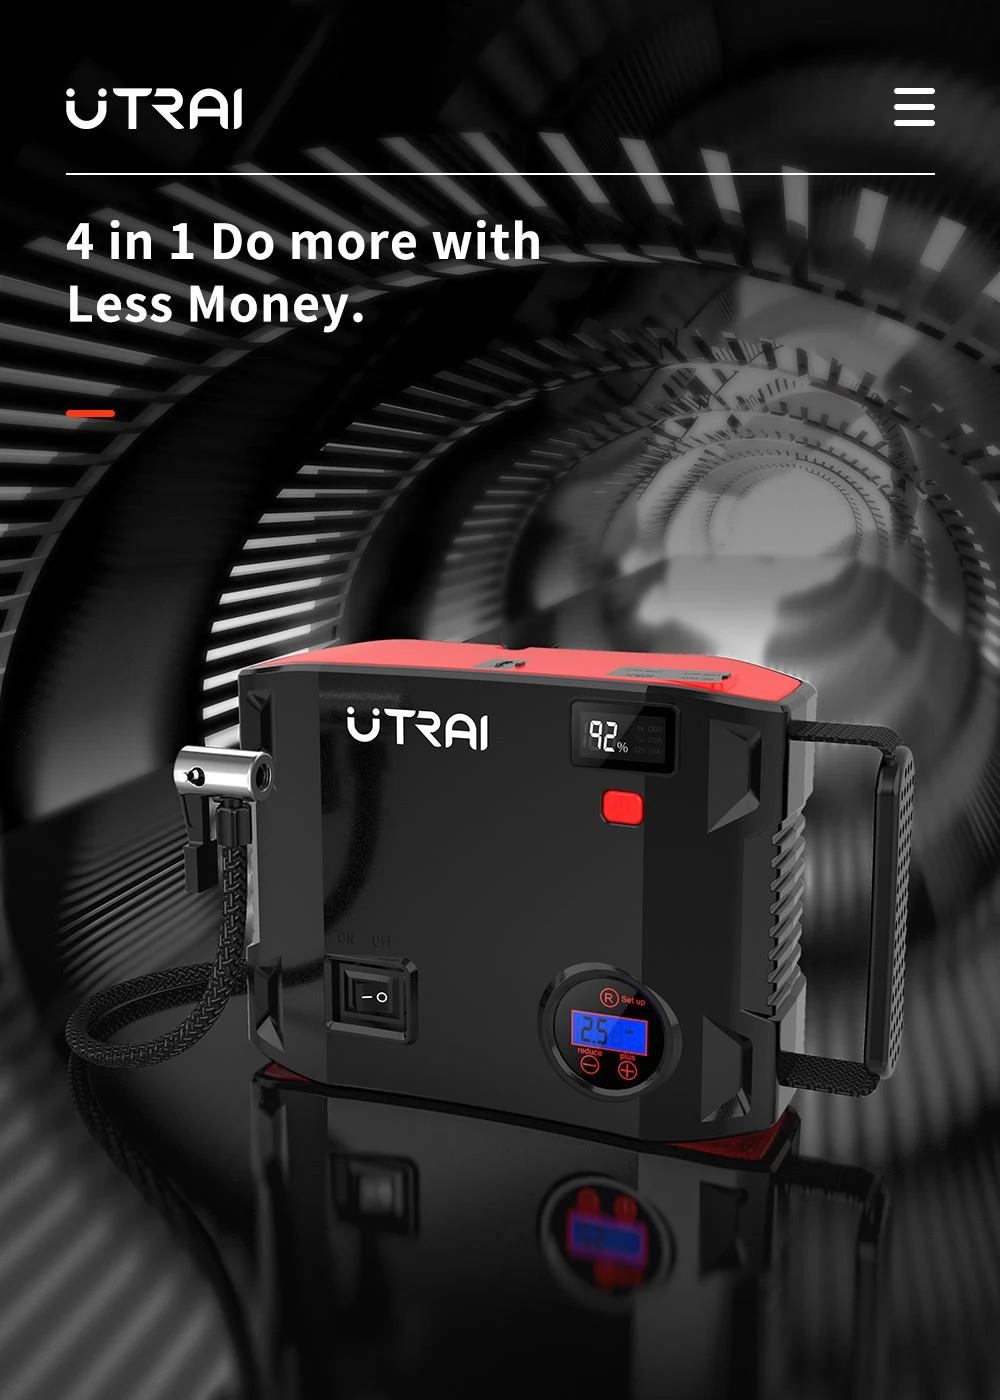 Utrai Jstar 5 Battery Charger With Air Compressor  Car battery charger,  Battery charger, Diesel engine